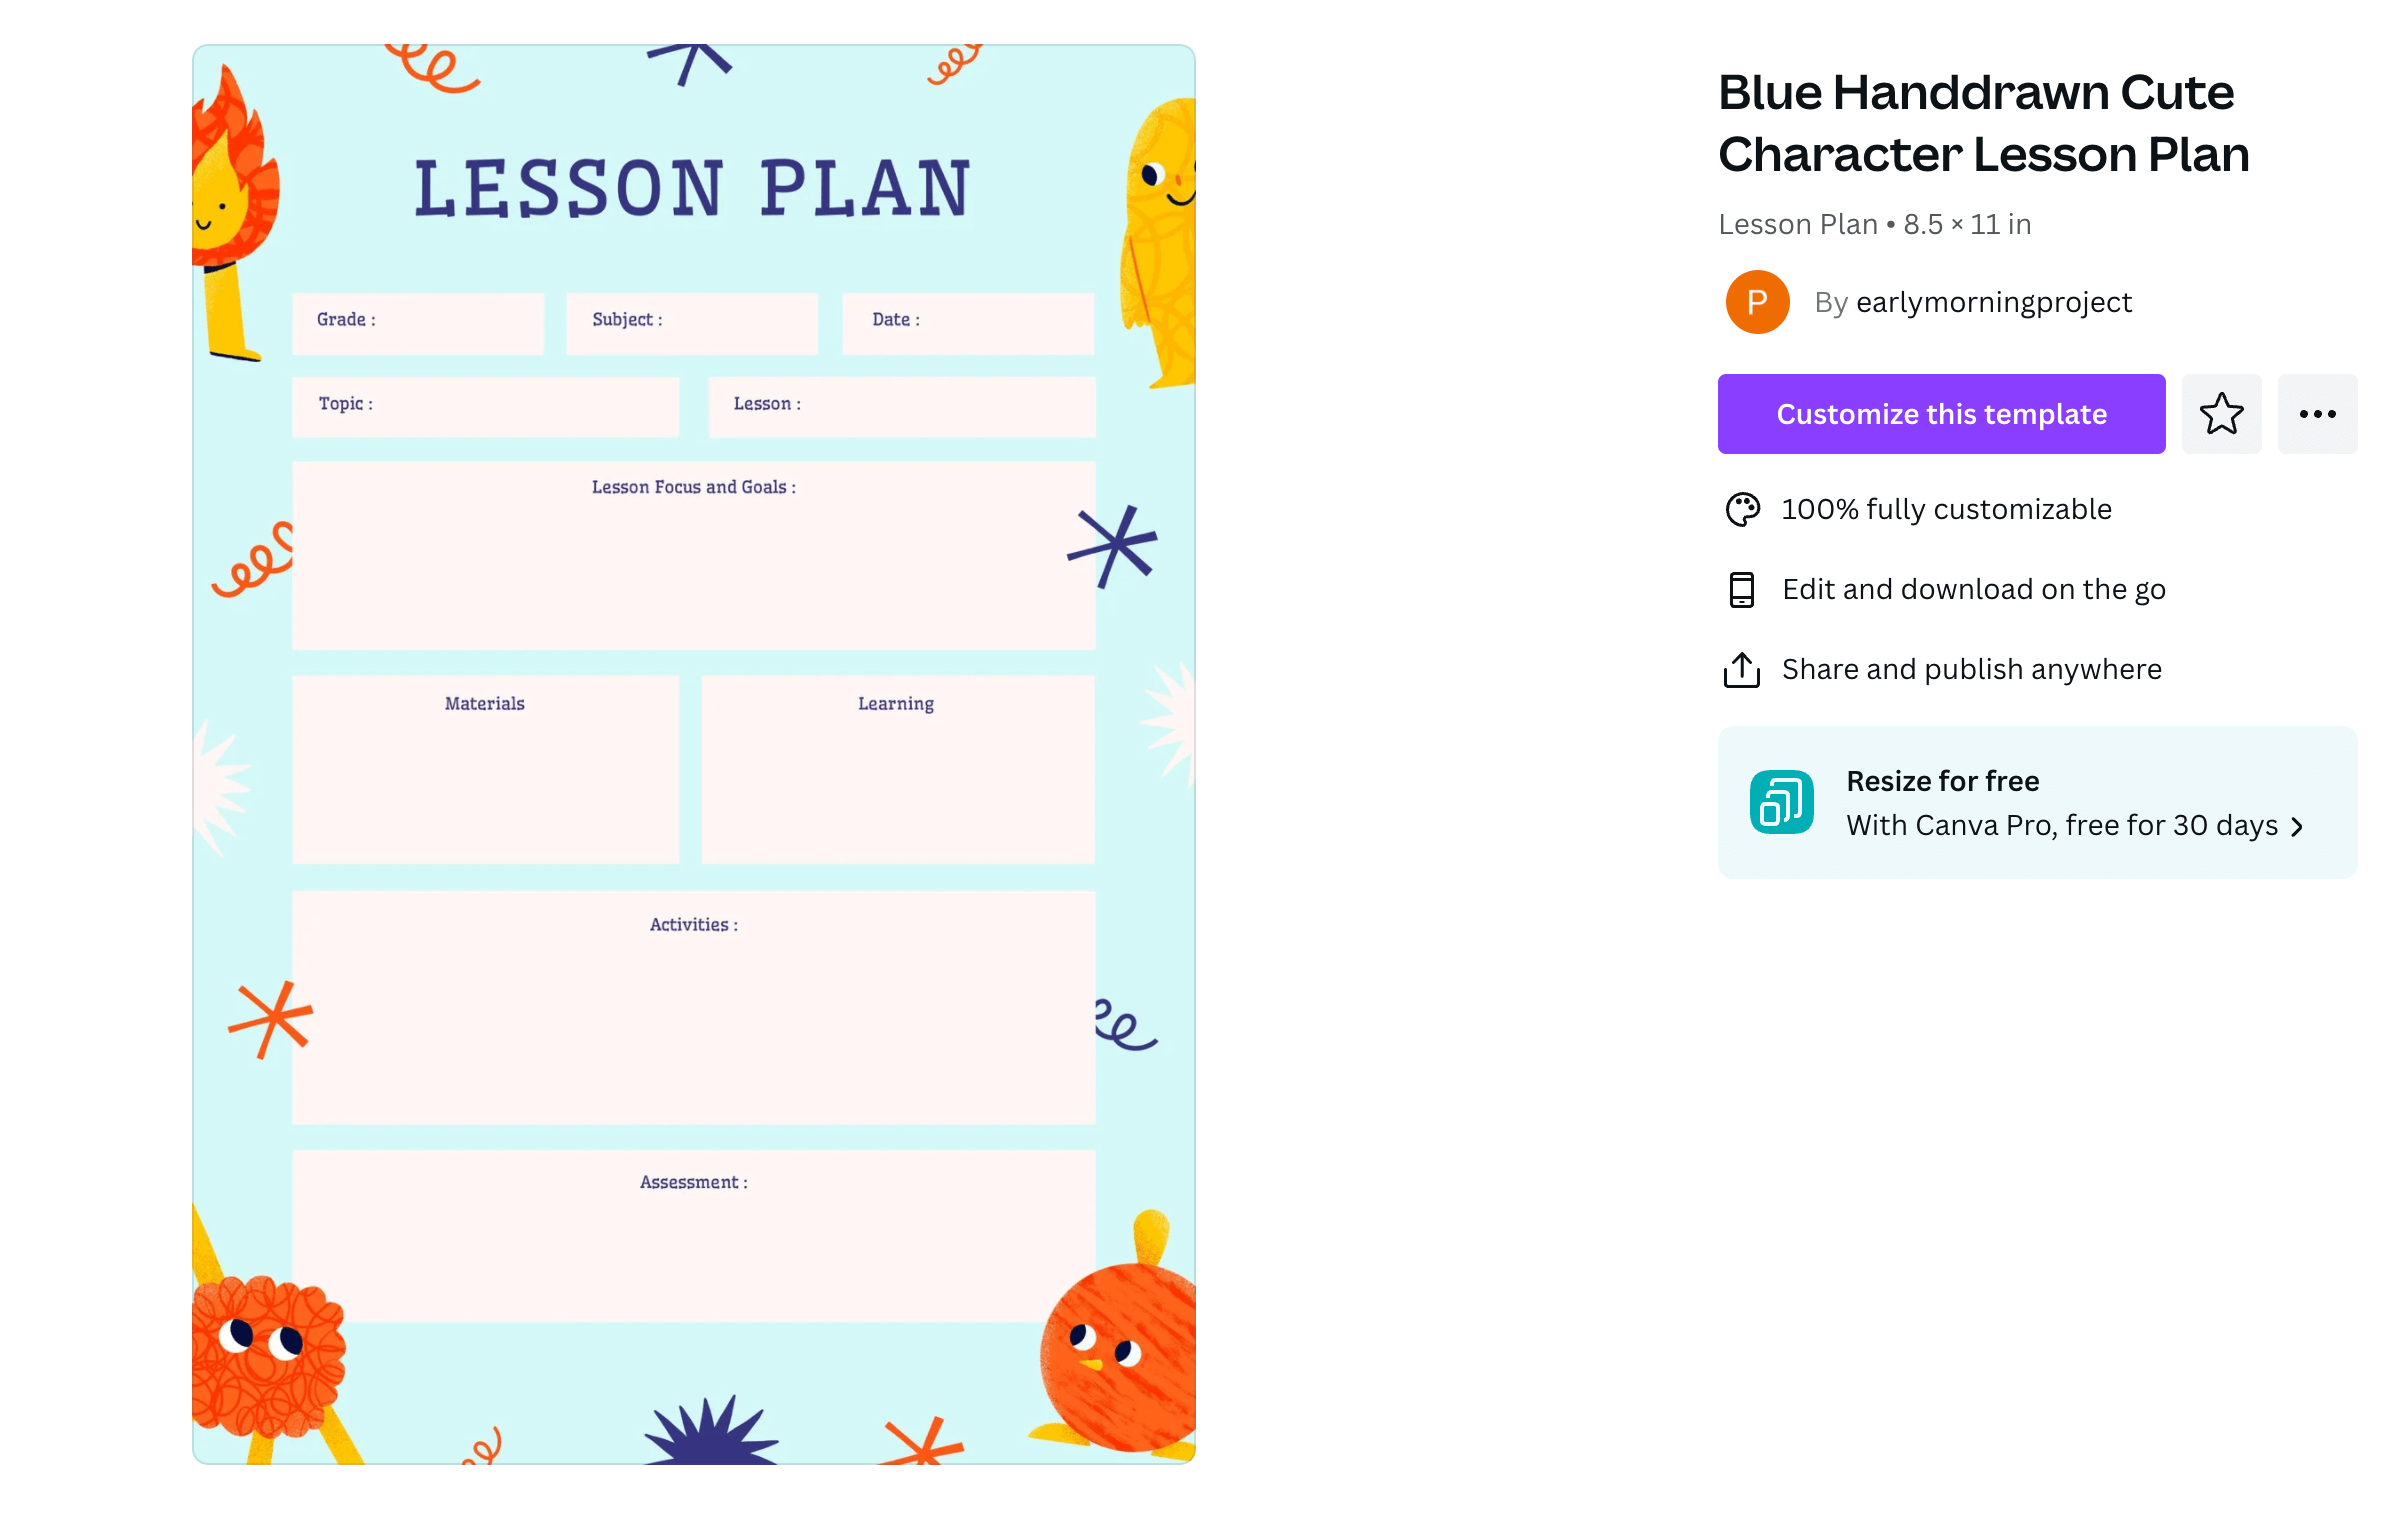 A lesson plan template with a light blue frame and various cartoony characters